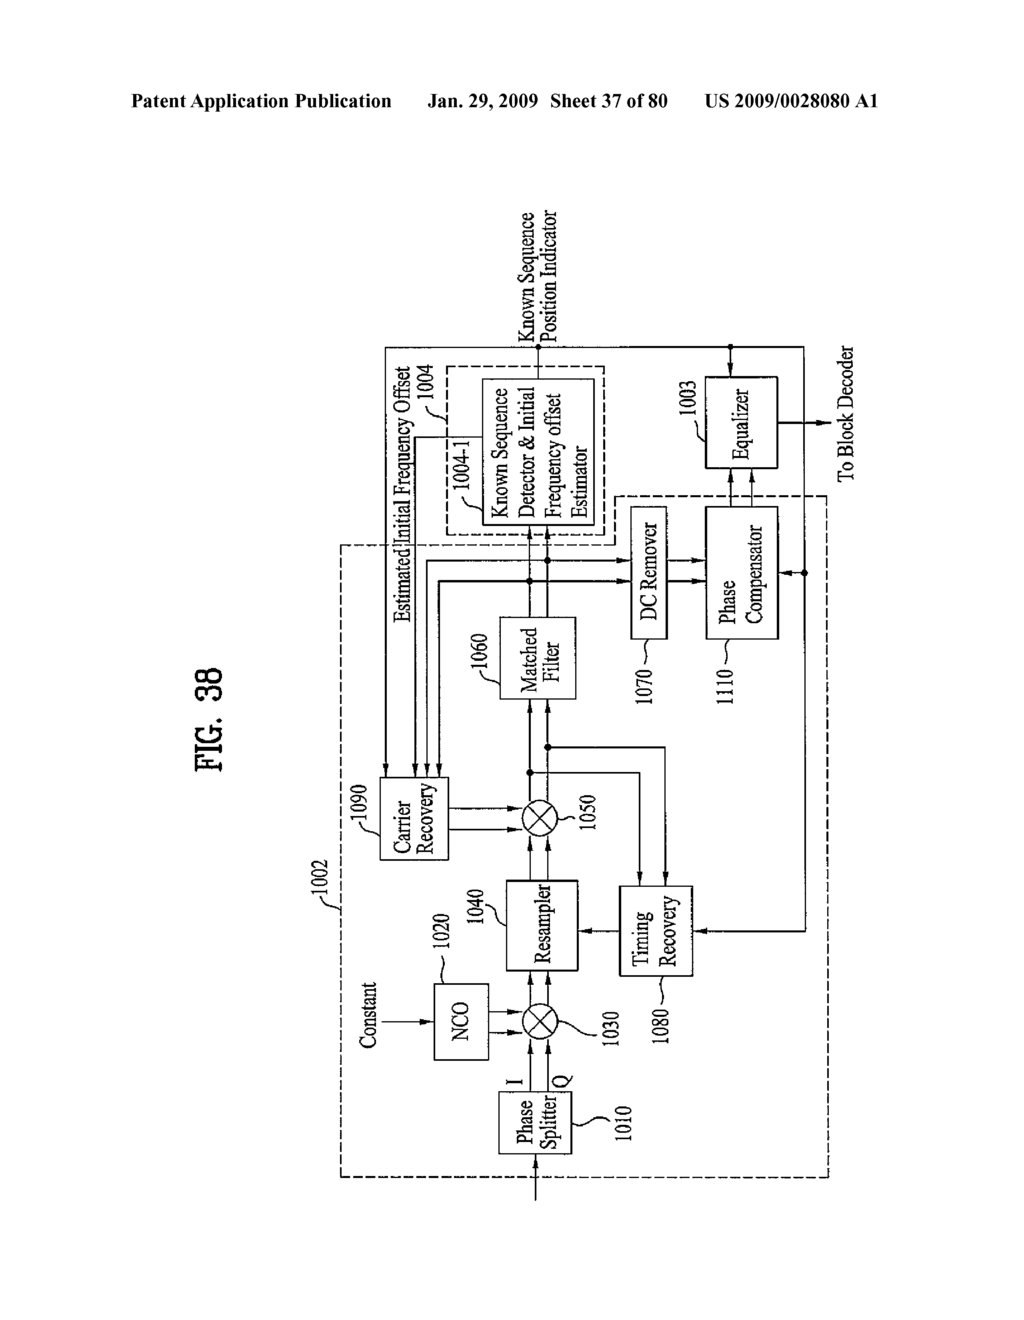 DIGITAL BROADCAST SYSTEM FOR TRANSMITTING/RECEIVING DIGITAL BROADCAST DATA, AND DATA PROCESSING METHOD FOR USE IN THE SAME - diagram, schematic, and image 38